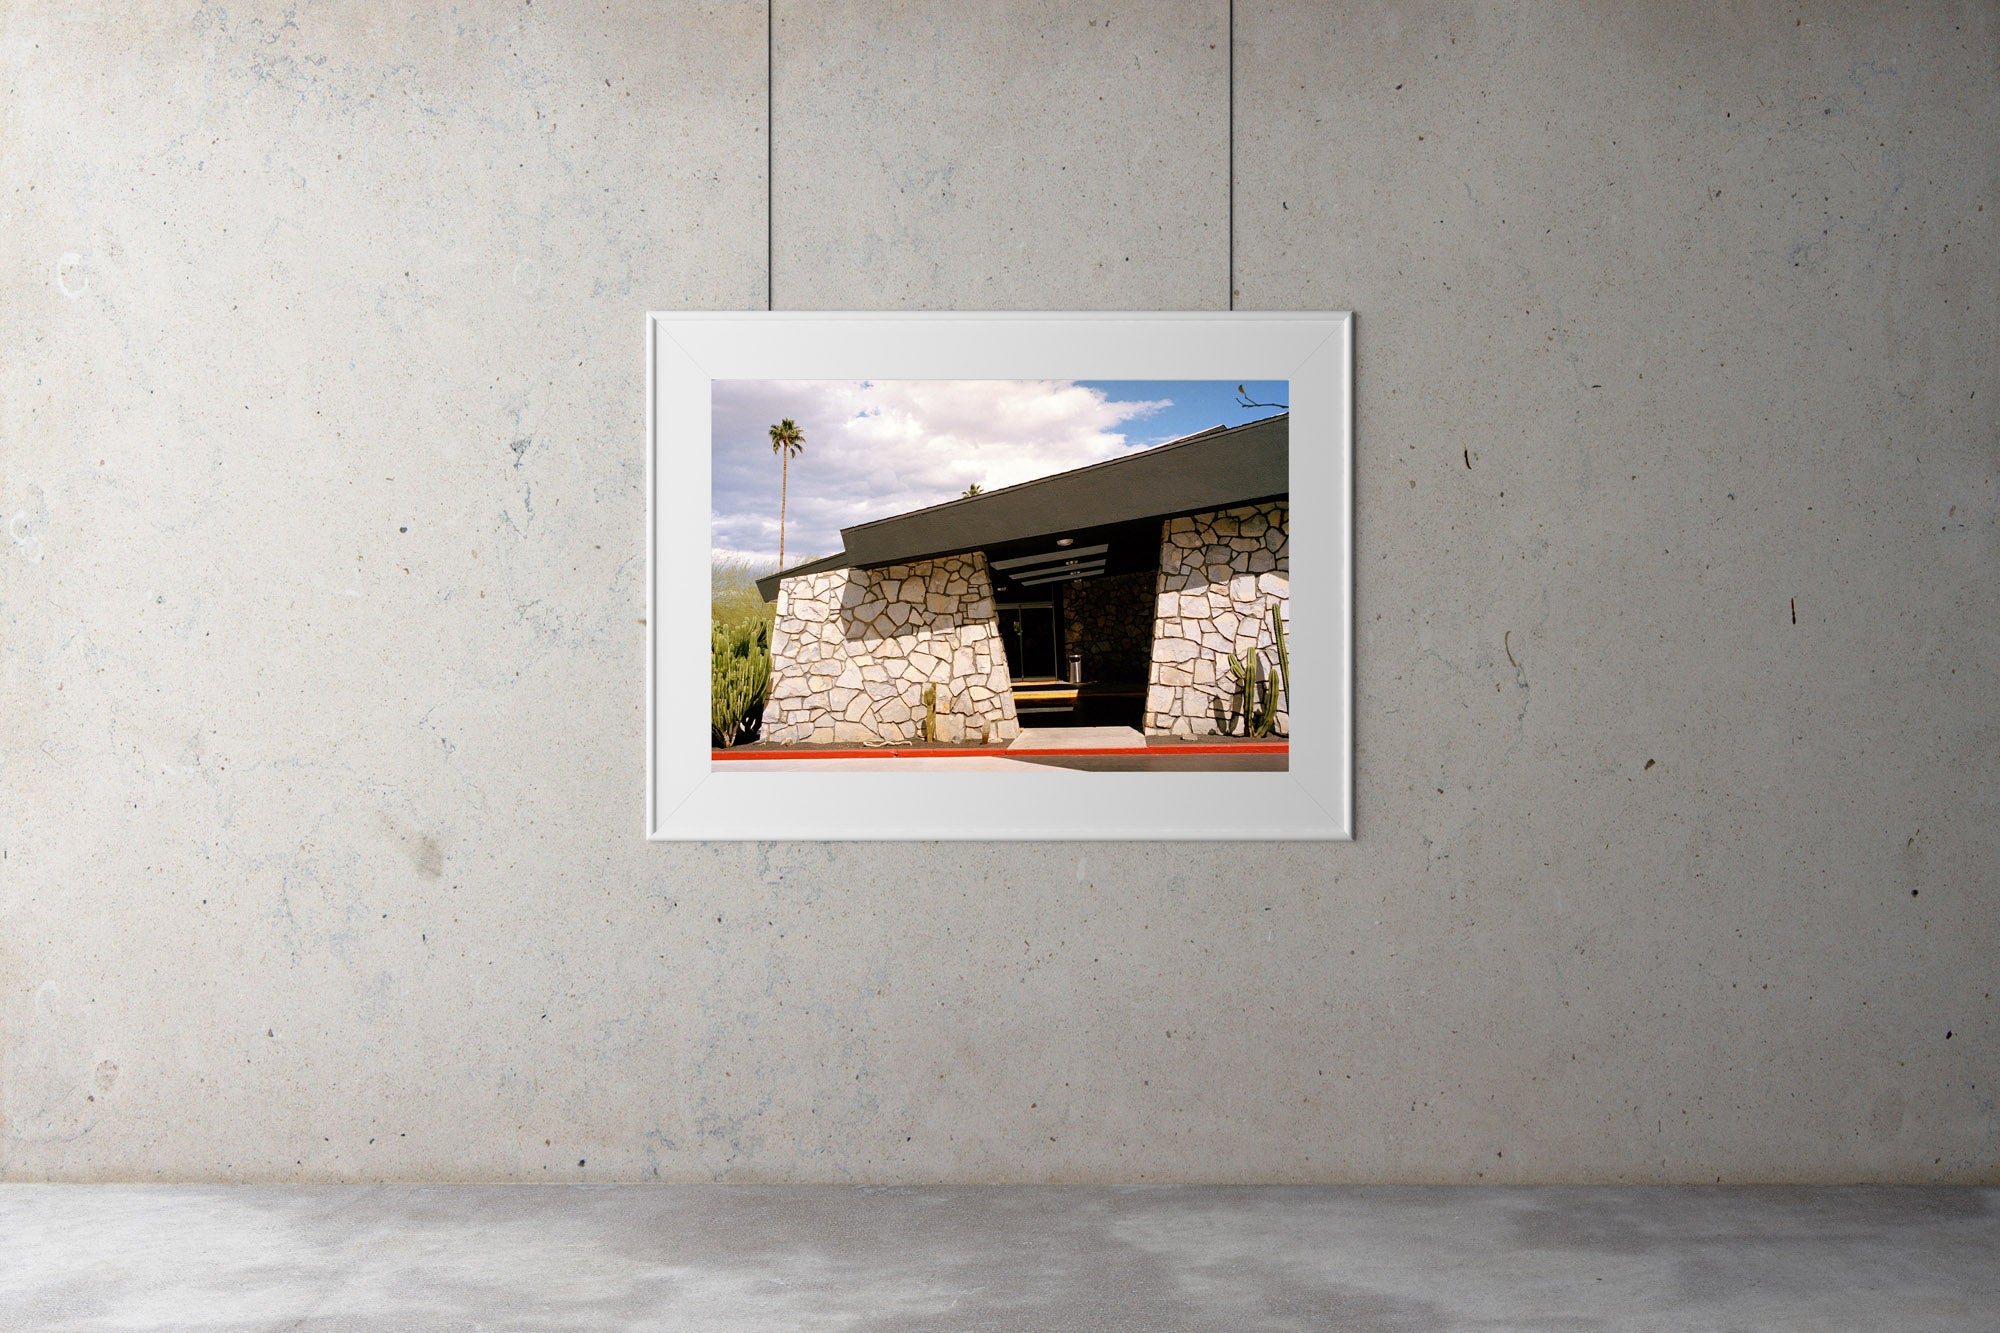 A photography of the Ace Hotel stone wall in Palm Springs. A retro mid century building. Retro, mid century, Artwork, Prints wall art California Photographic prints Ocean Palm Springs Framed artwork, Photography,  Film photography, Vintage photo style,  Interior design, beach, Buy Art, photography art, buy art, Prints for sale, art prints, colour photography, surfing, surfboard, Palm Springs,  surfing, sun, beach,